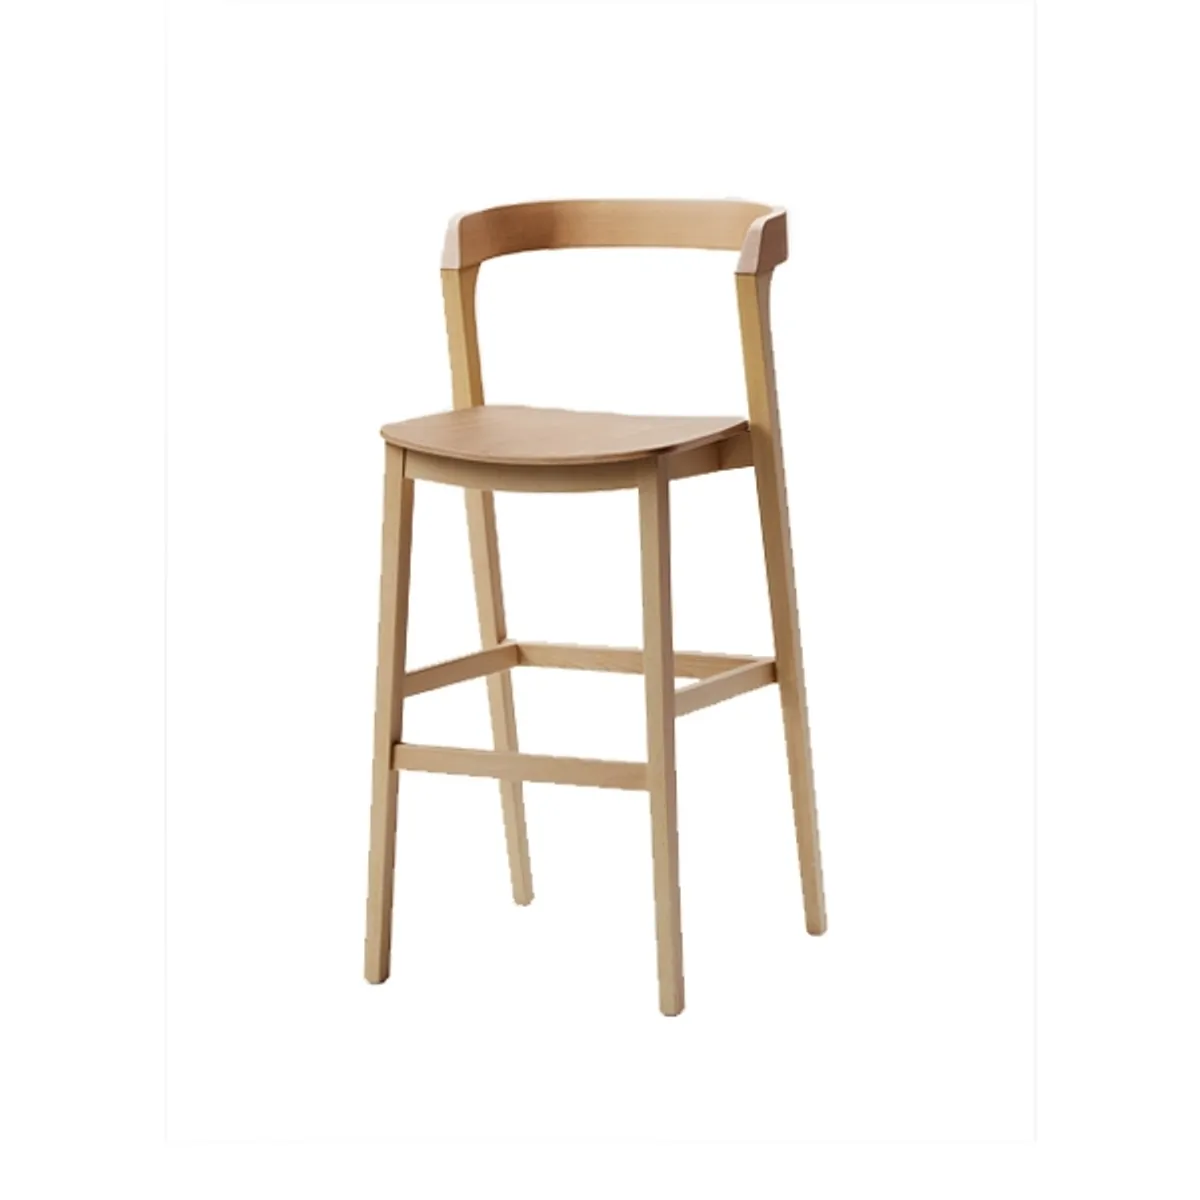 Crest wood bar stool Inside Out Contracts2